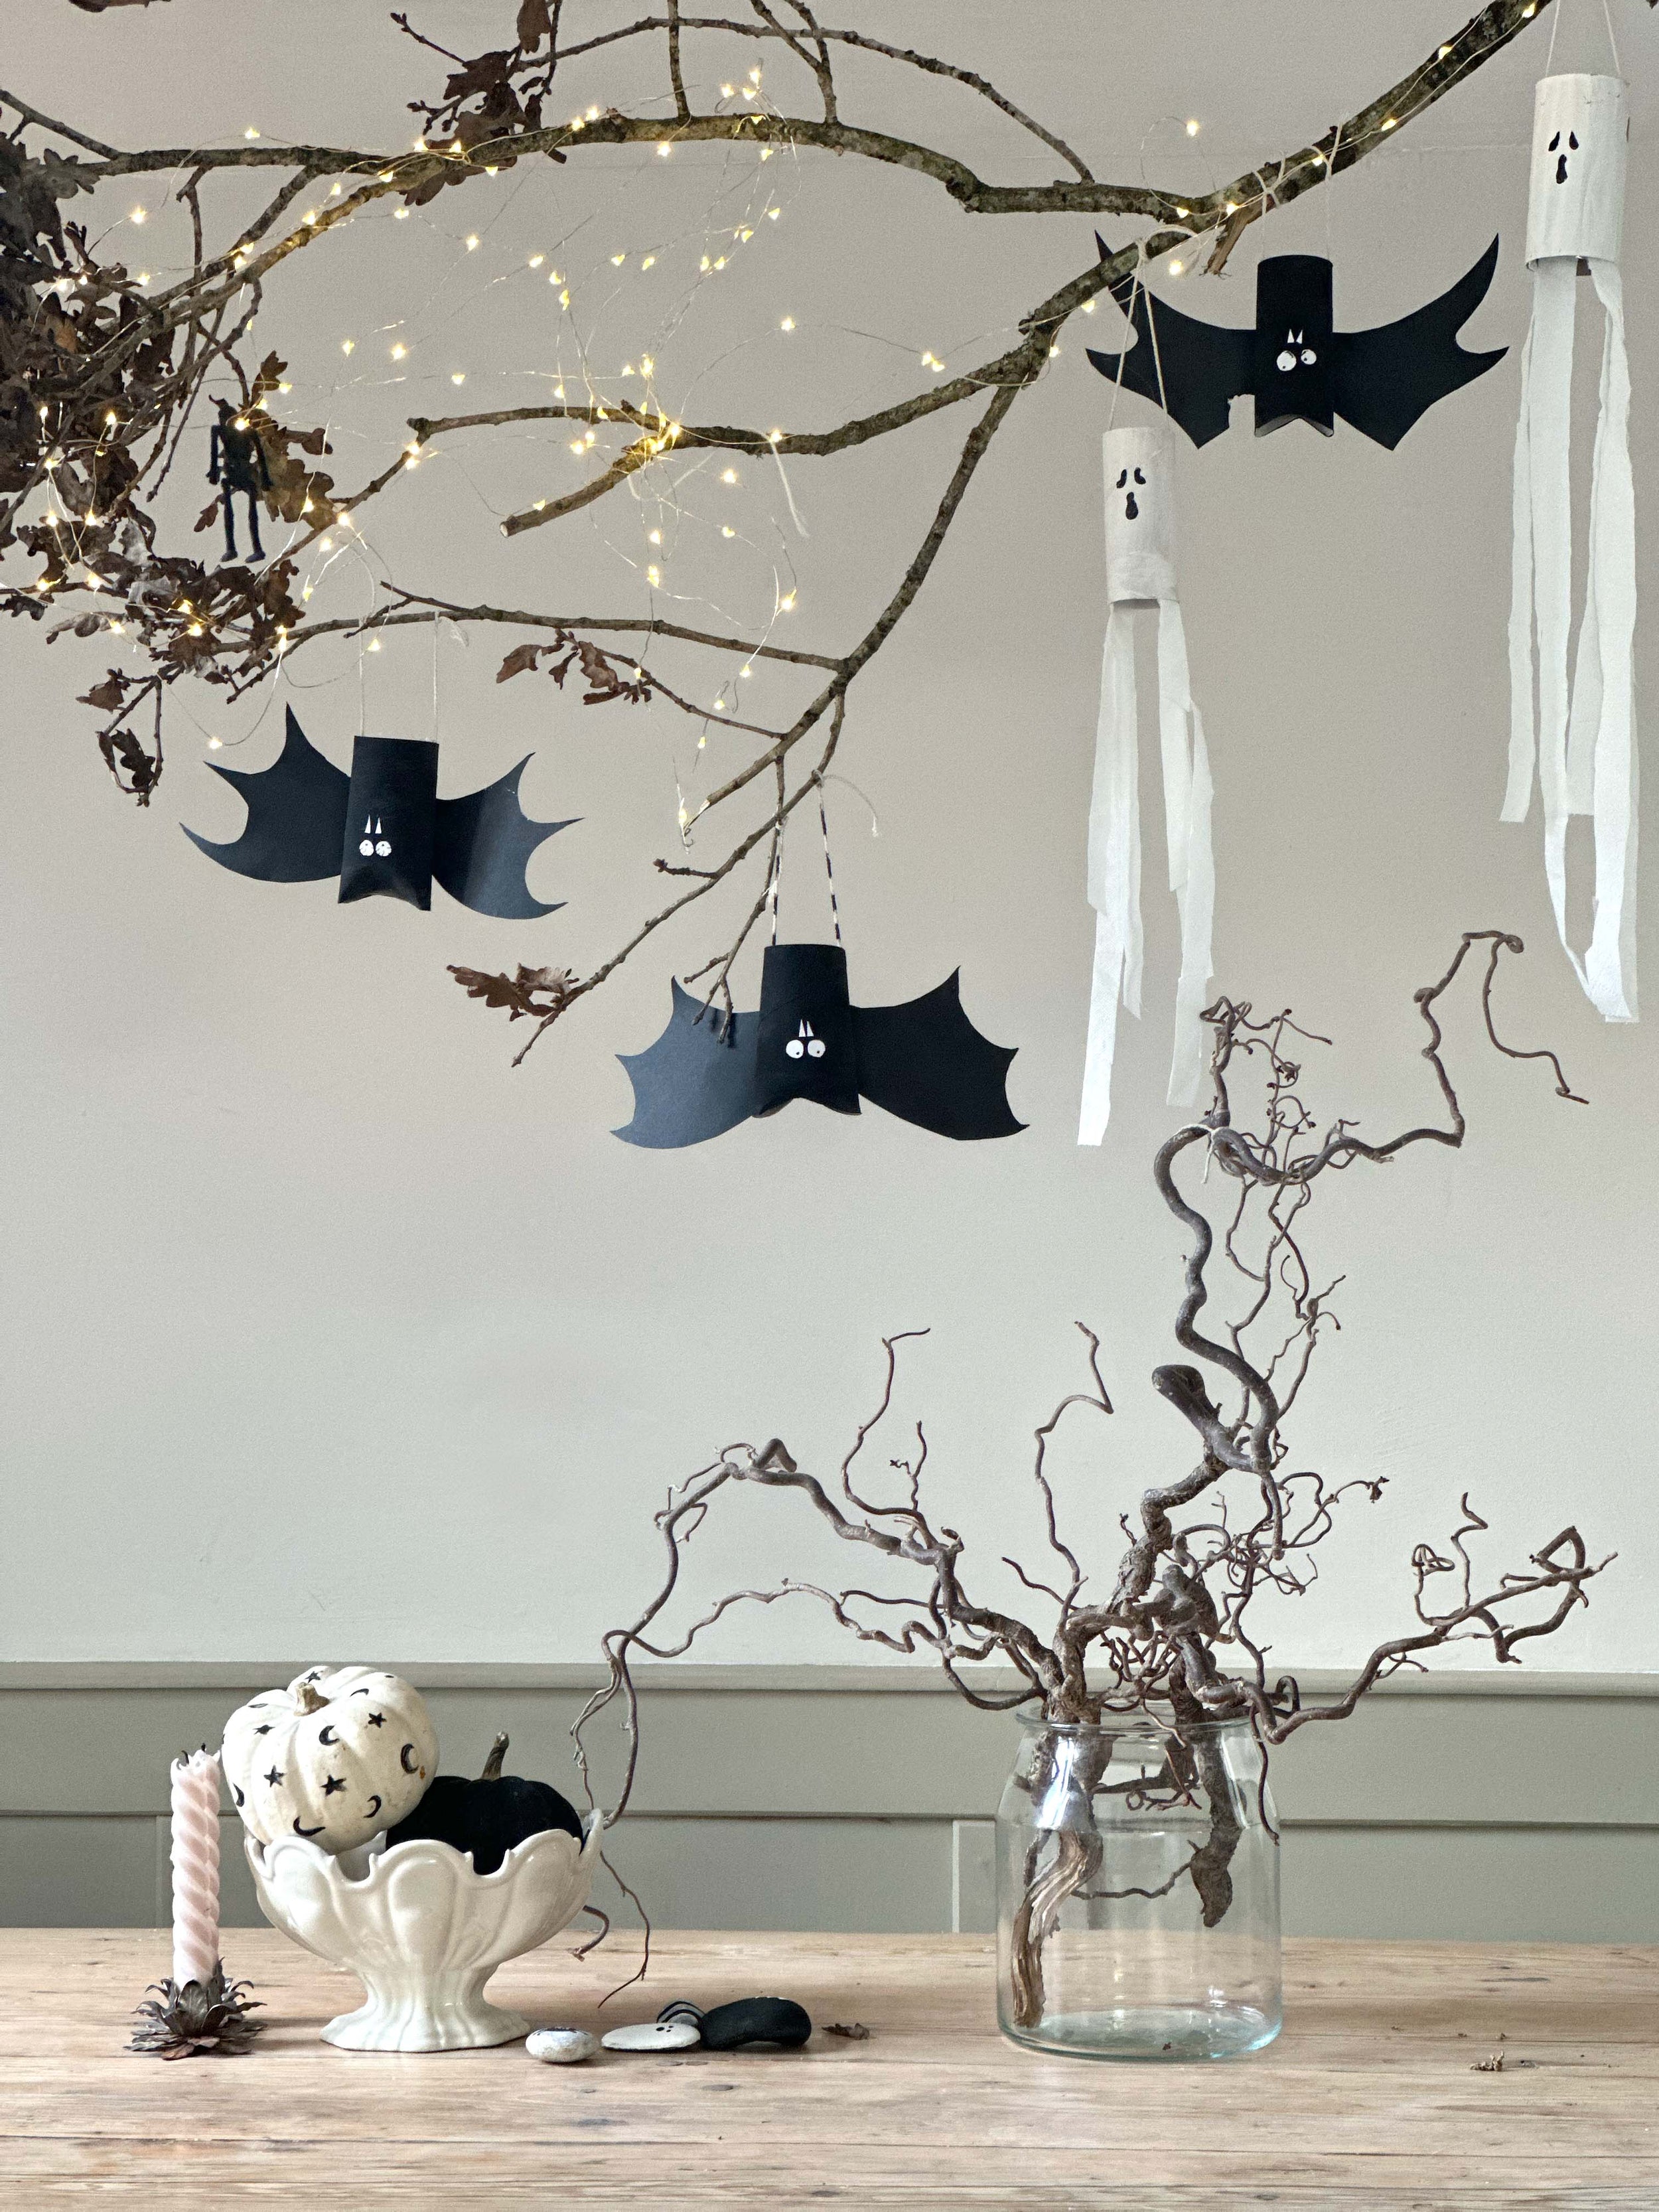 How to Make Halloween Bats and Ghosts